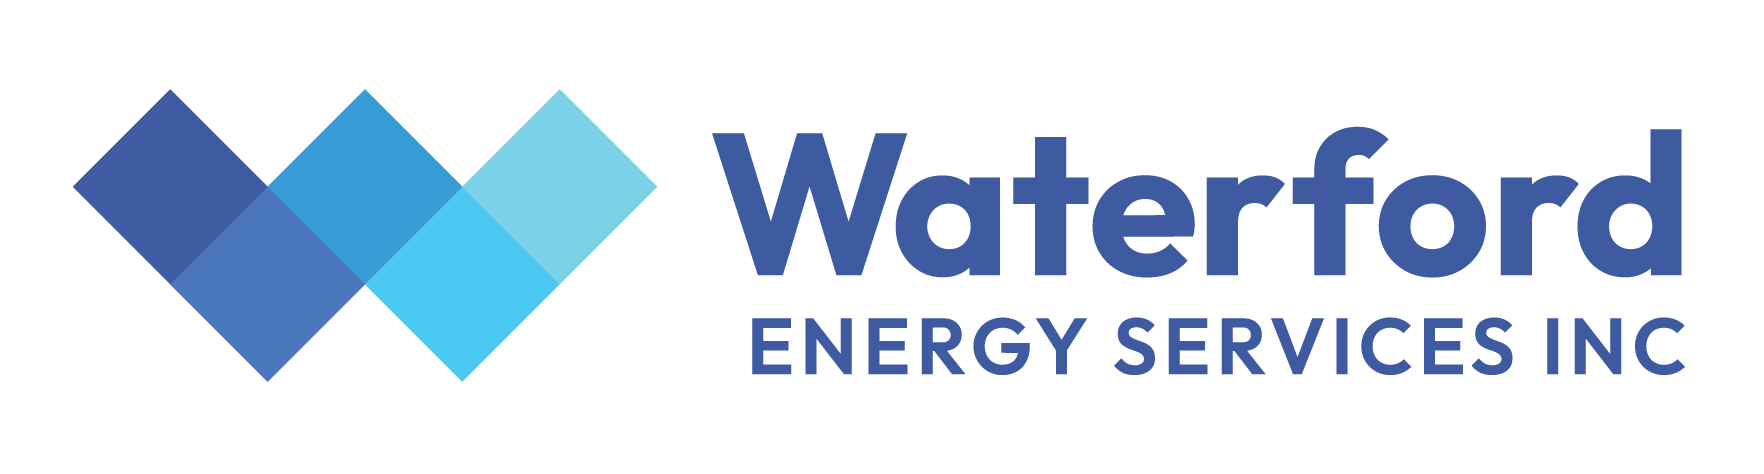 Waterford Energy Services